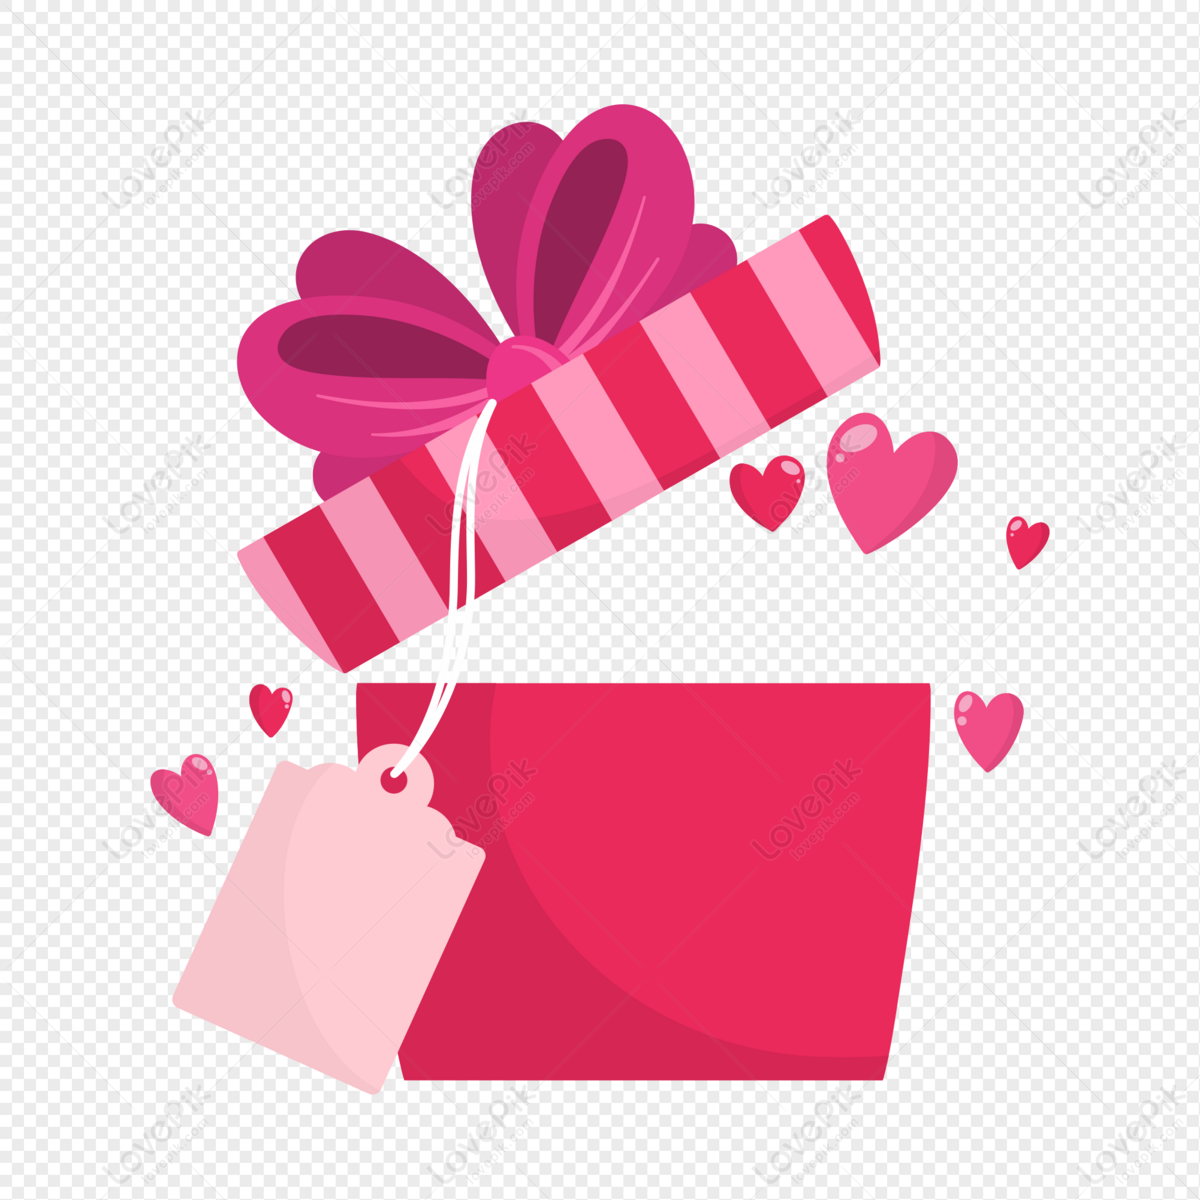 Pink Gift Box Png Hd Transparent Image And Clipart Image For Free